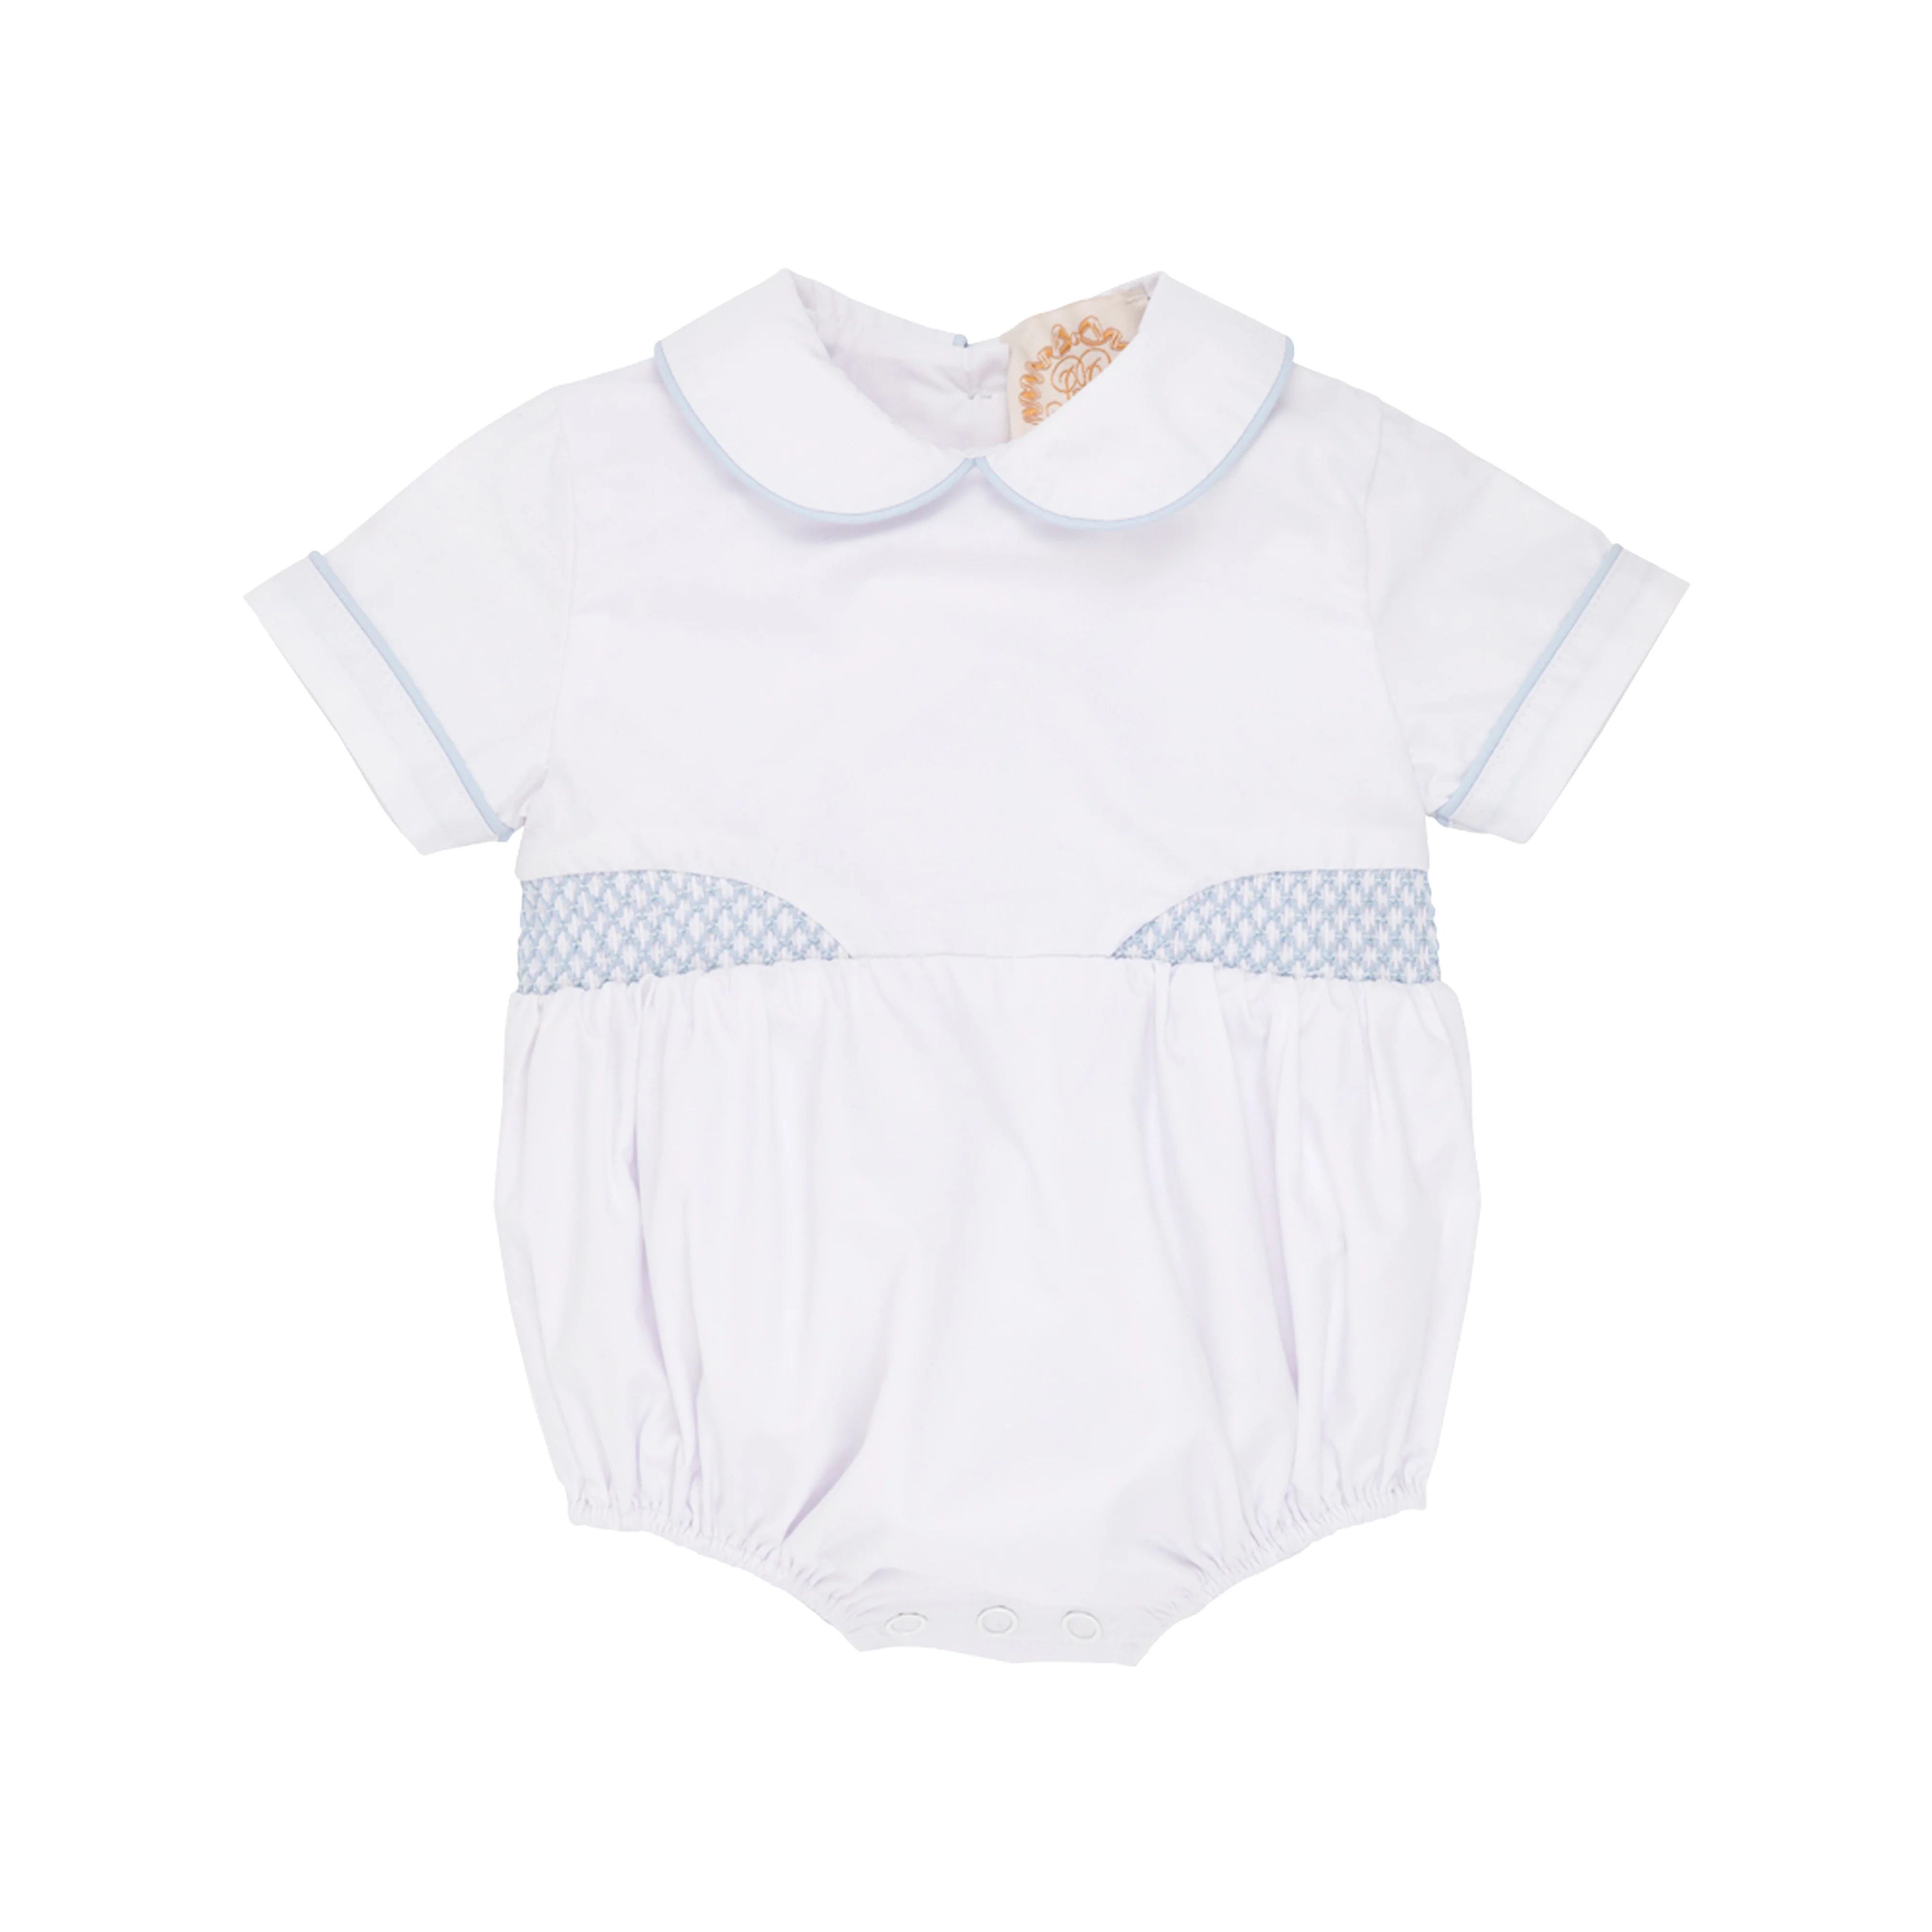 Worth Avenue White with Buckhead Blue Smocking | The Beaufort Bonnet Company